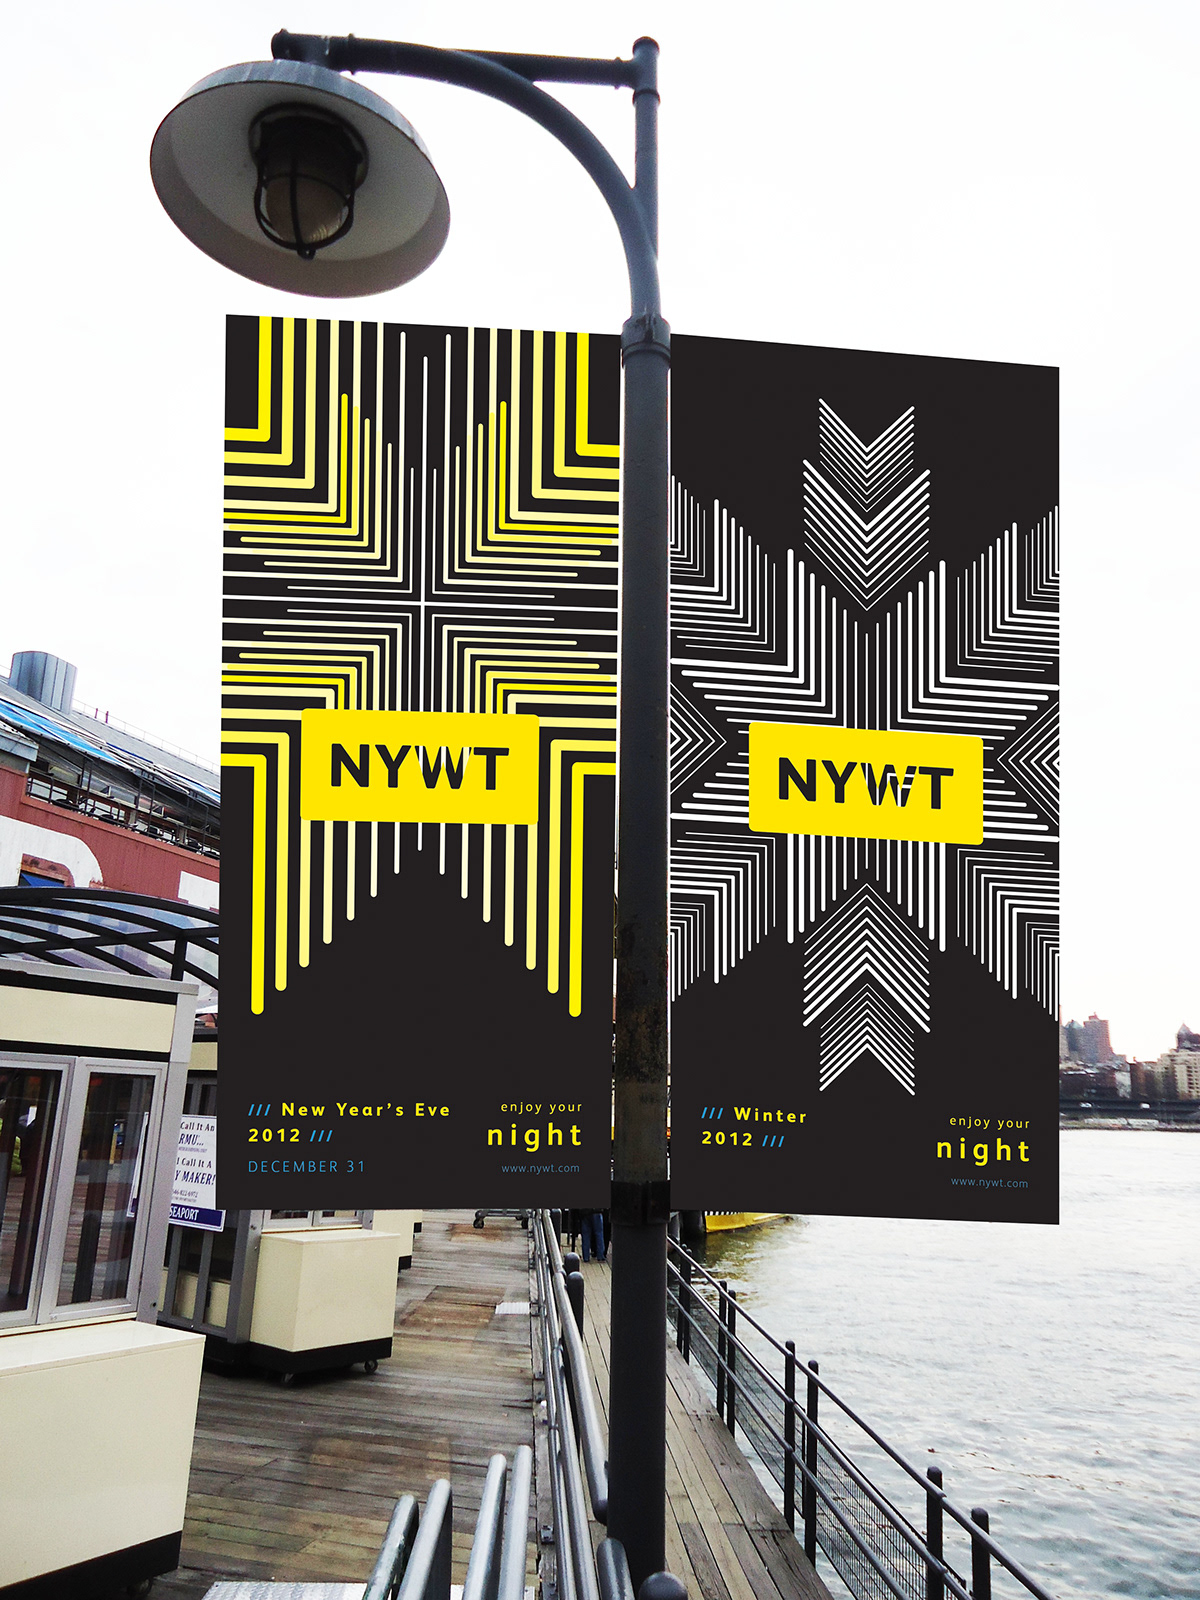 New York water taxi Transport Rebrand